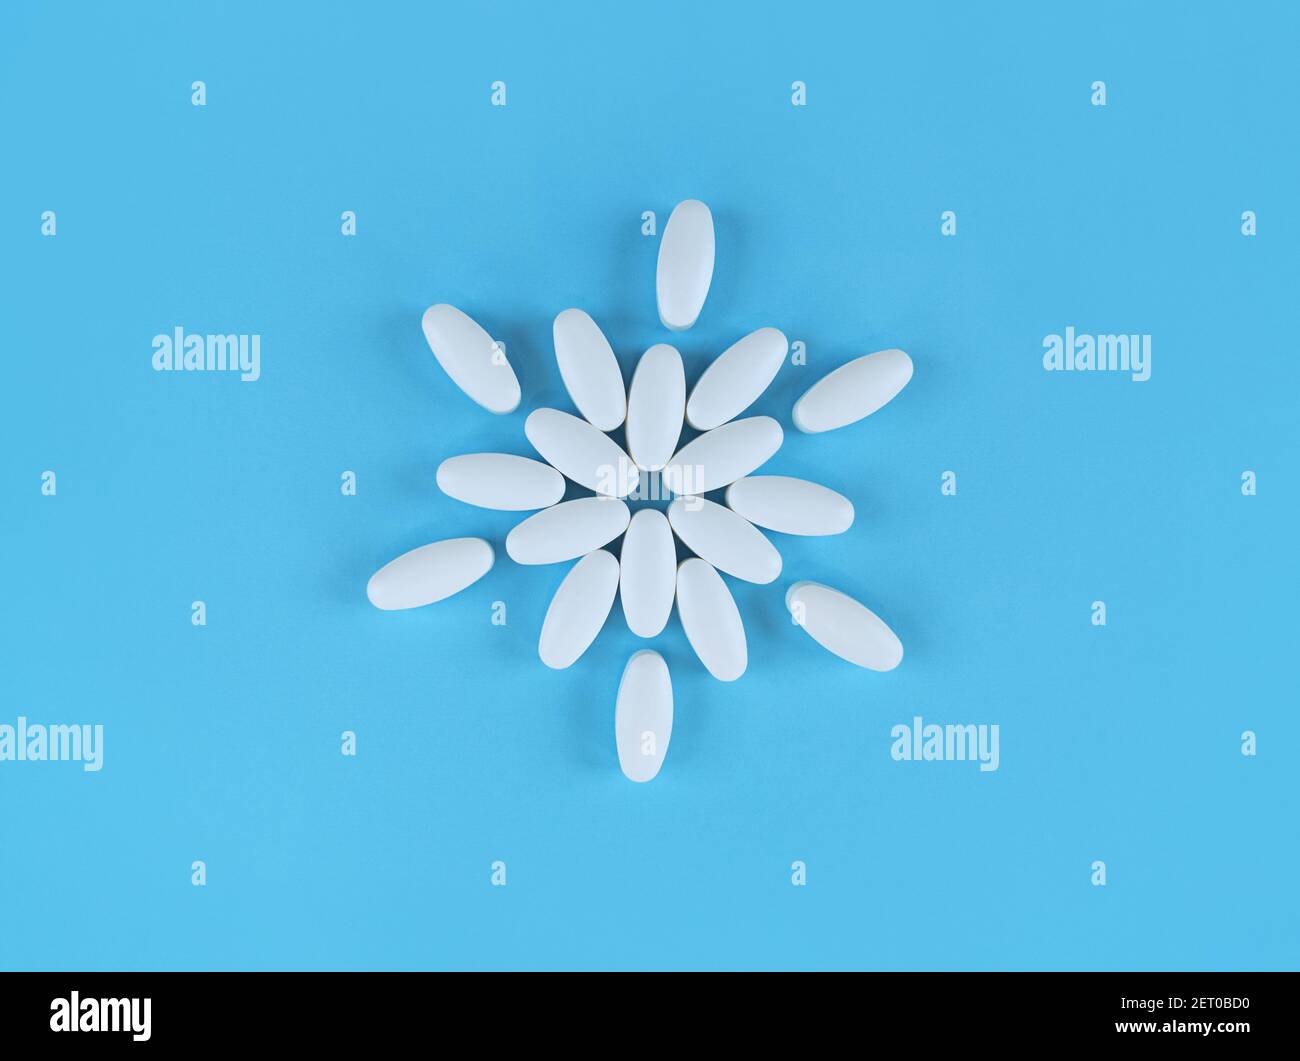 Flower shape made from white tablets on blue backdrop. Stock Photo